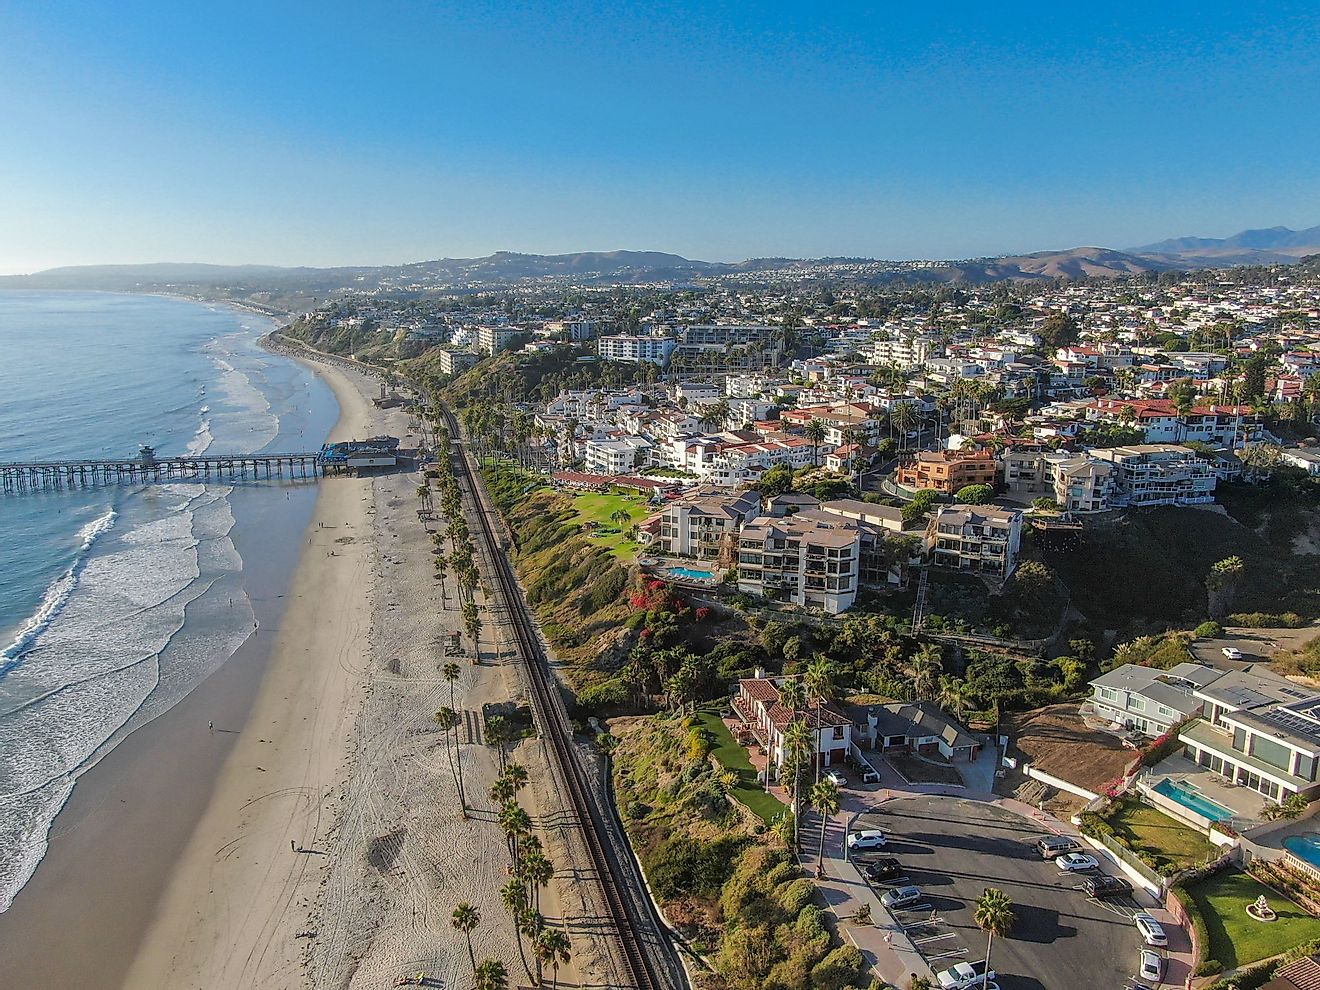 Aerial view of San Clemente coastline town and beach, Orange County, California. 